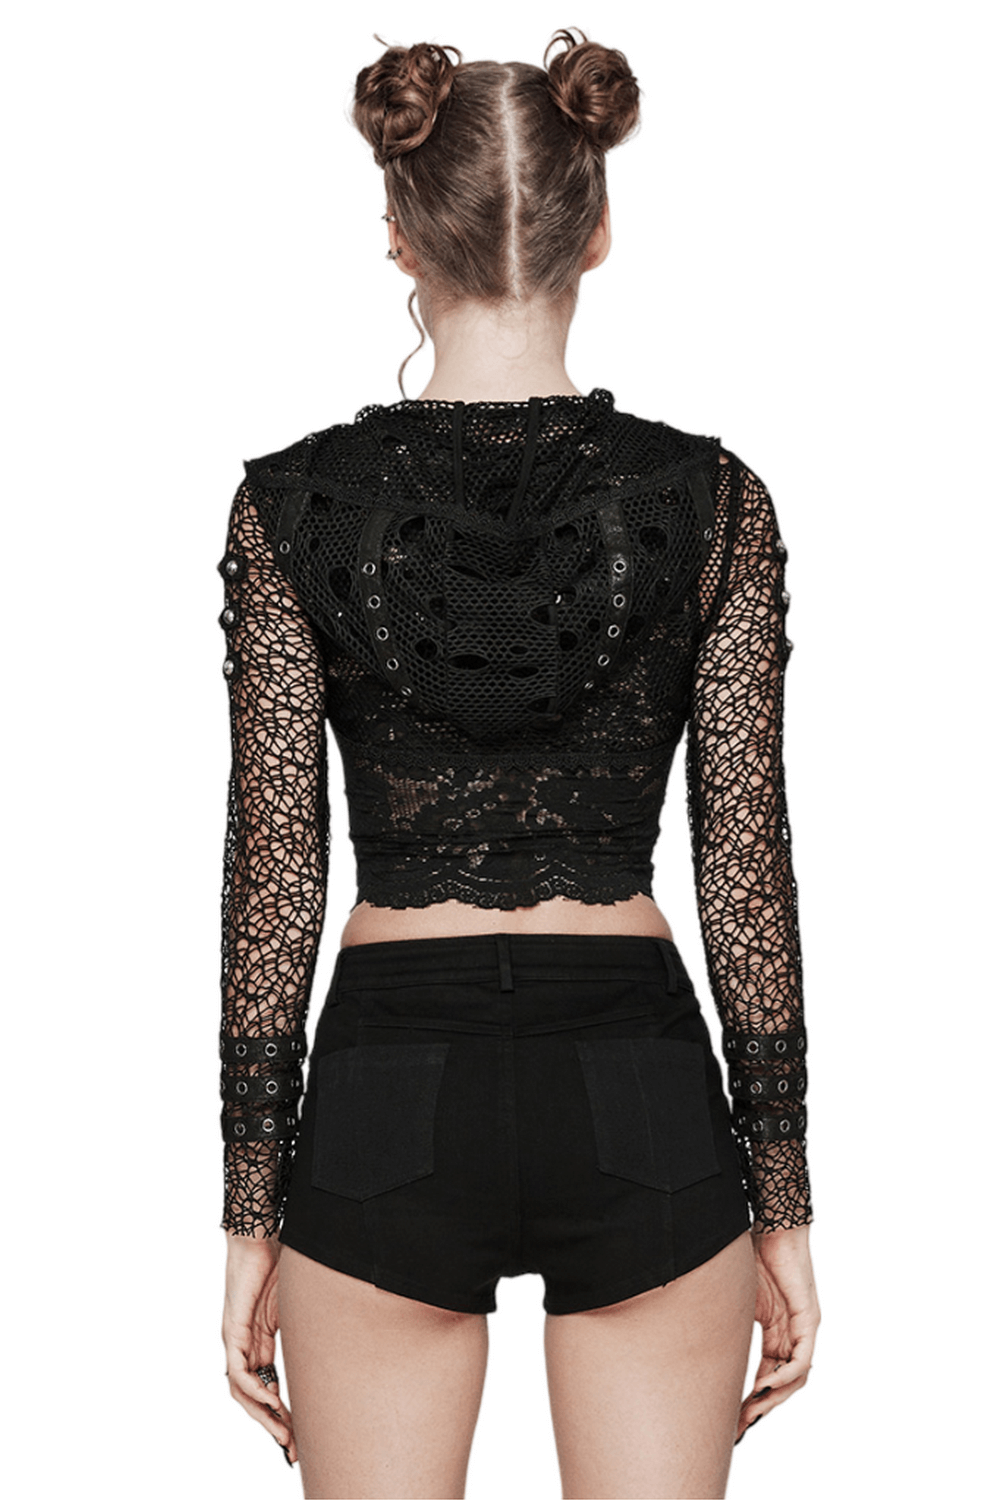 Gothic Women's Ripped Mesh and Lace Cropped Hoodie